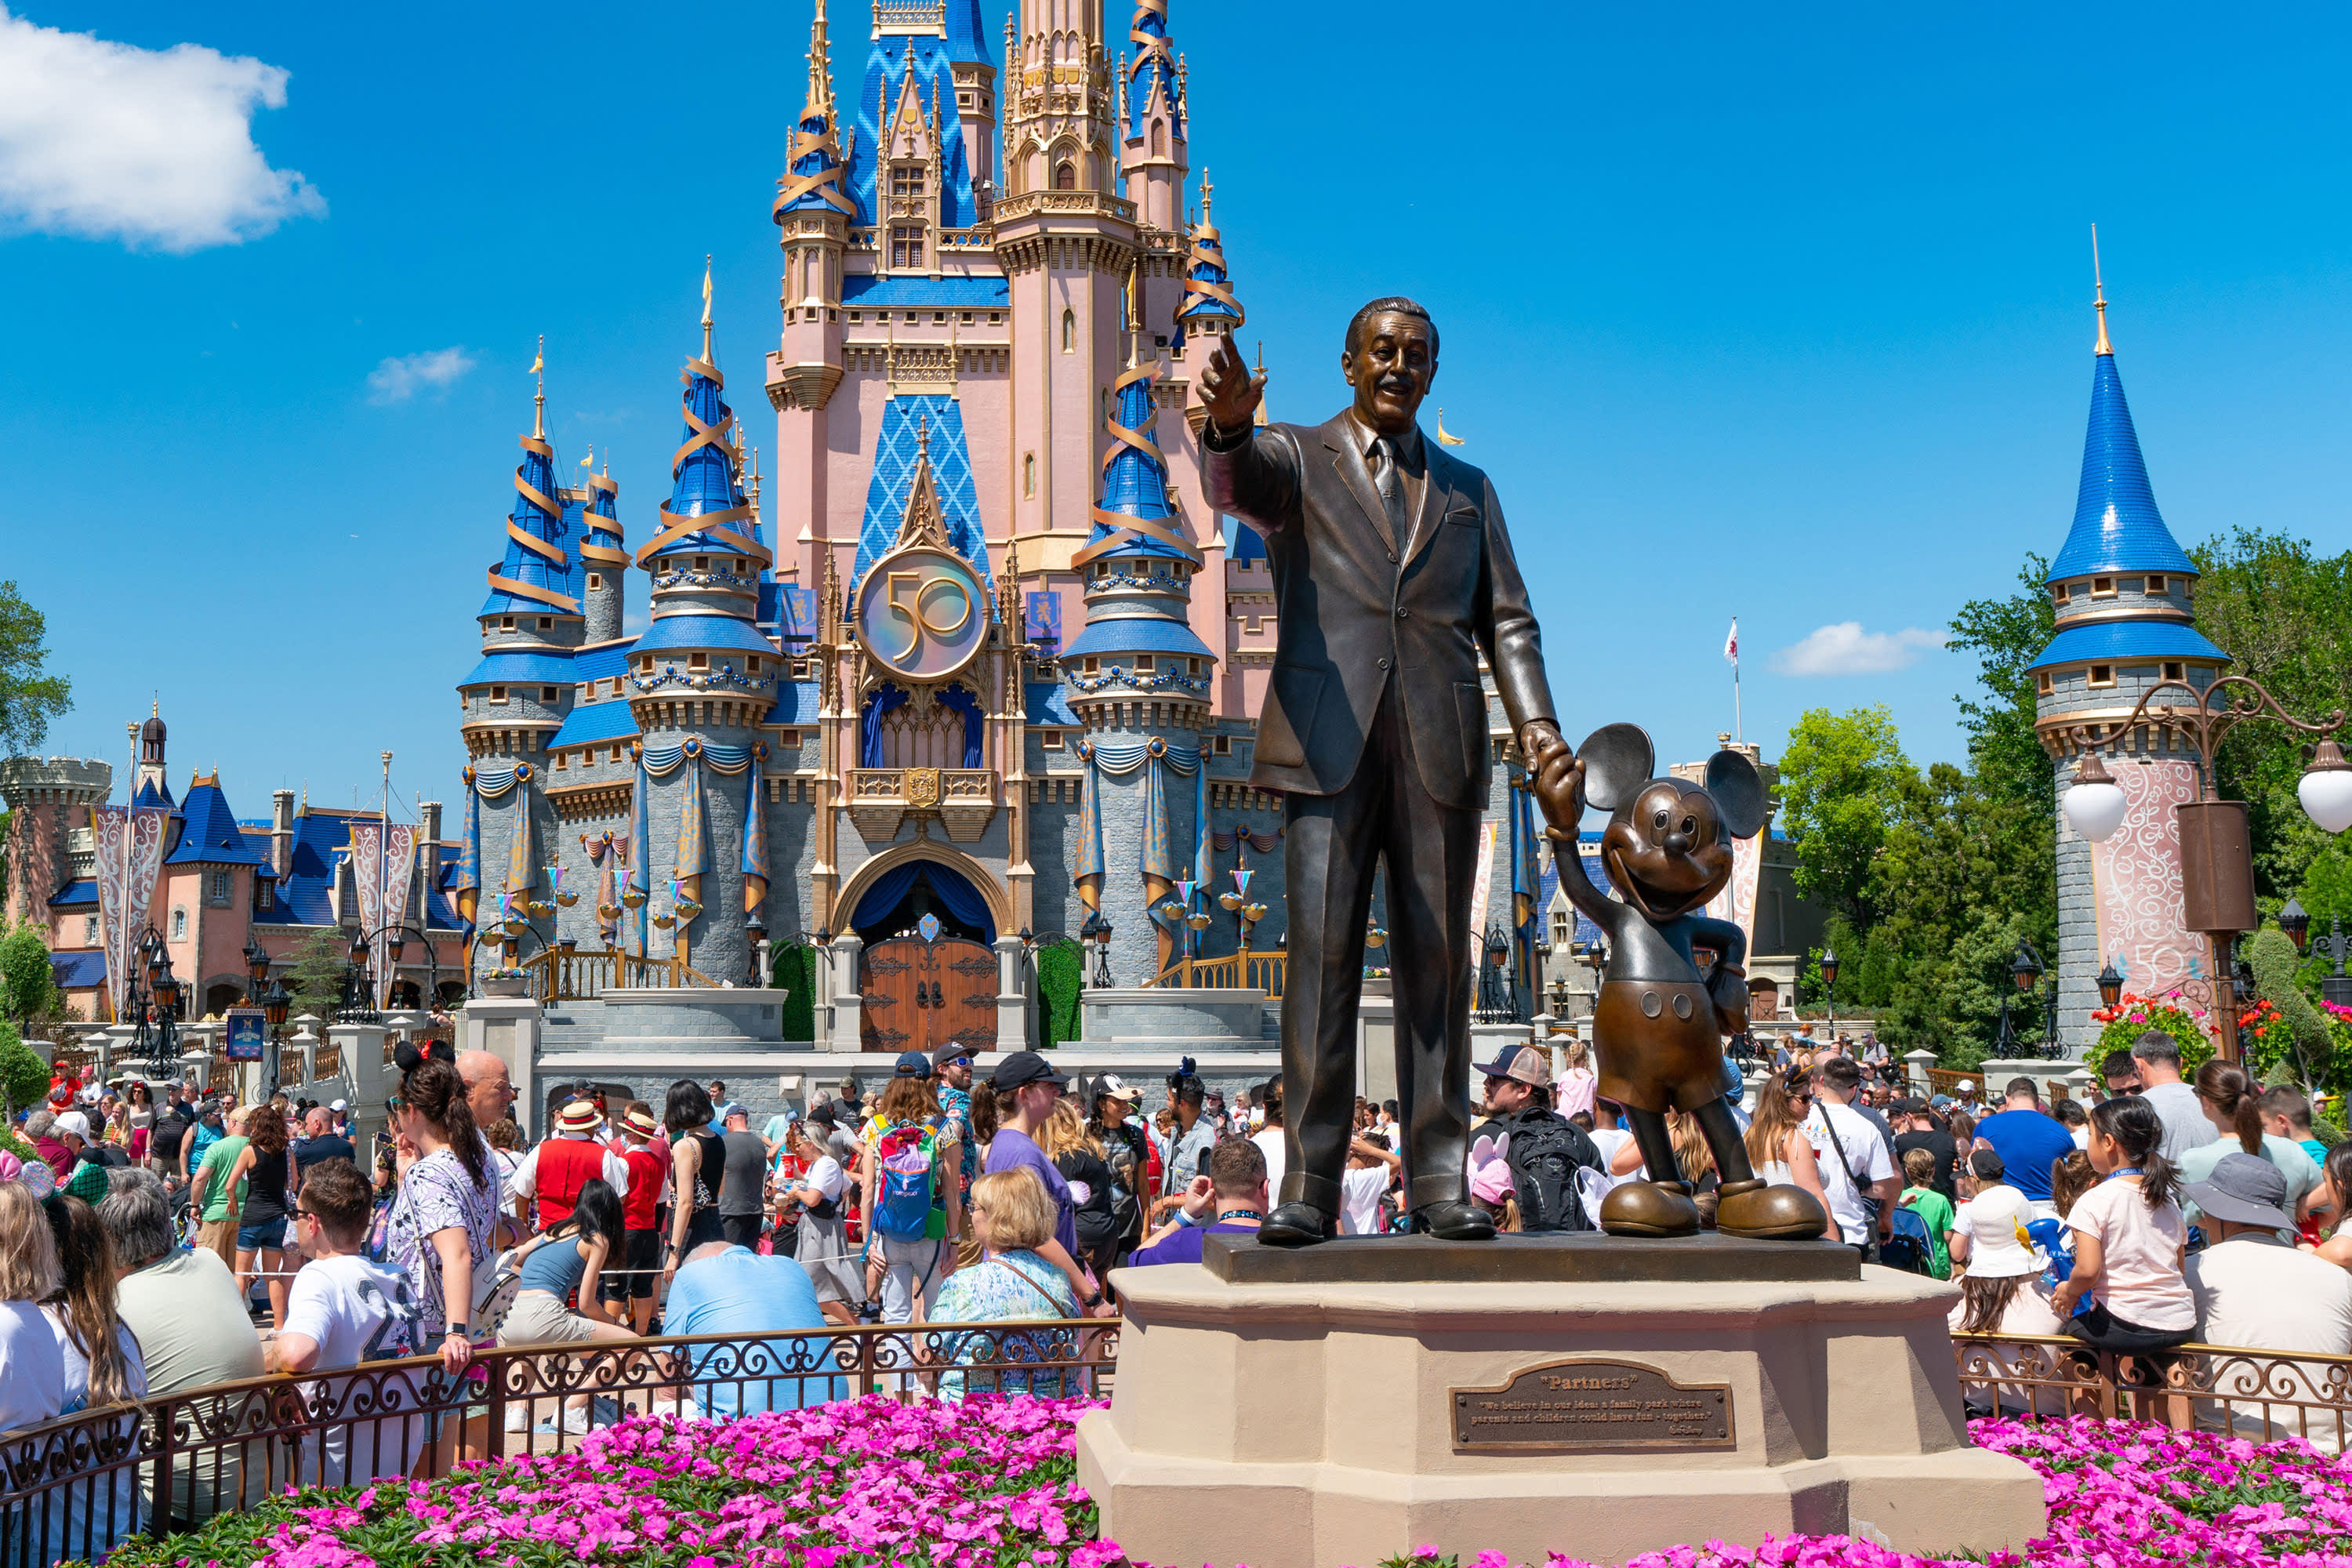 Theme parks bounced back in 2022 from pandemic lows with revenue